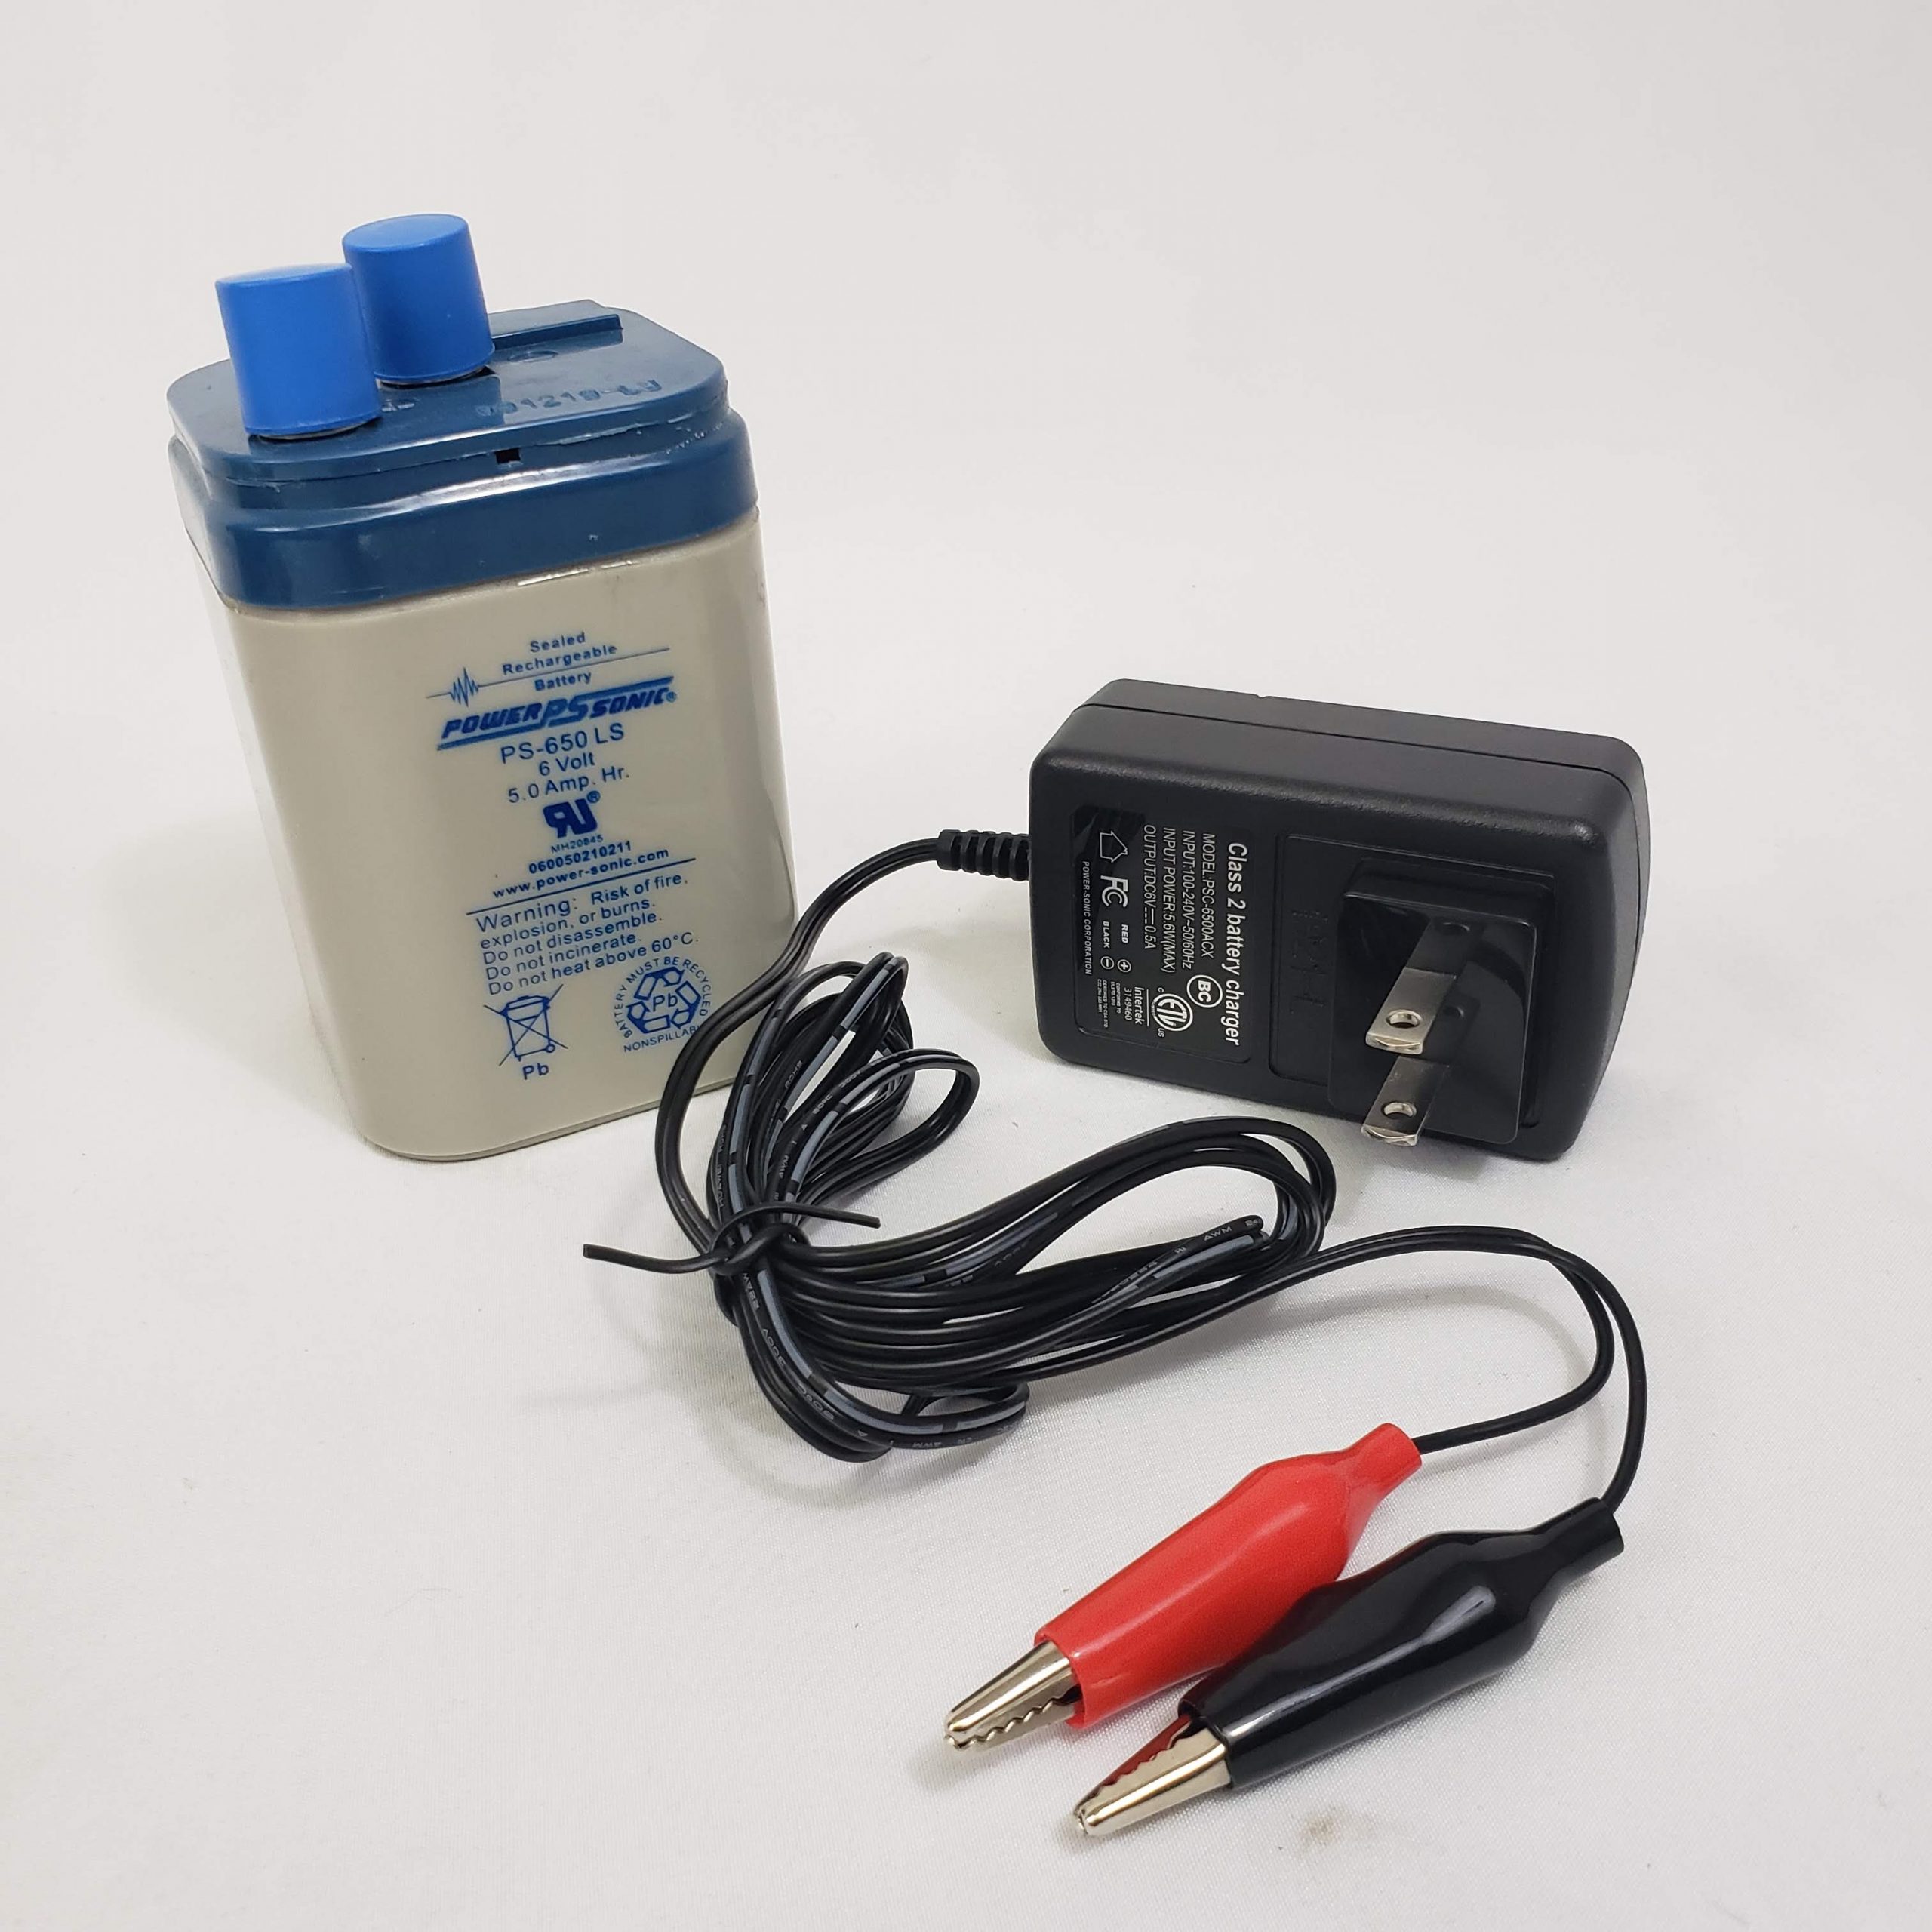 6 volt battery chargers